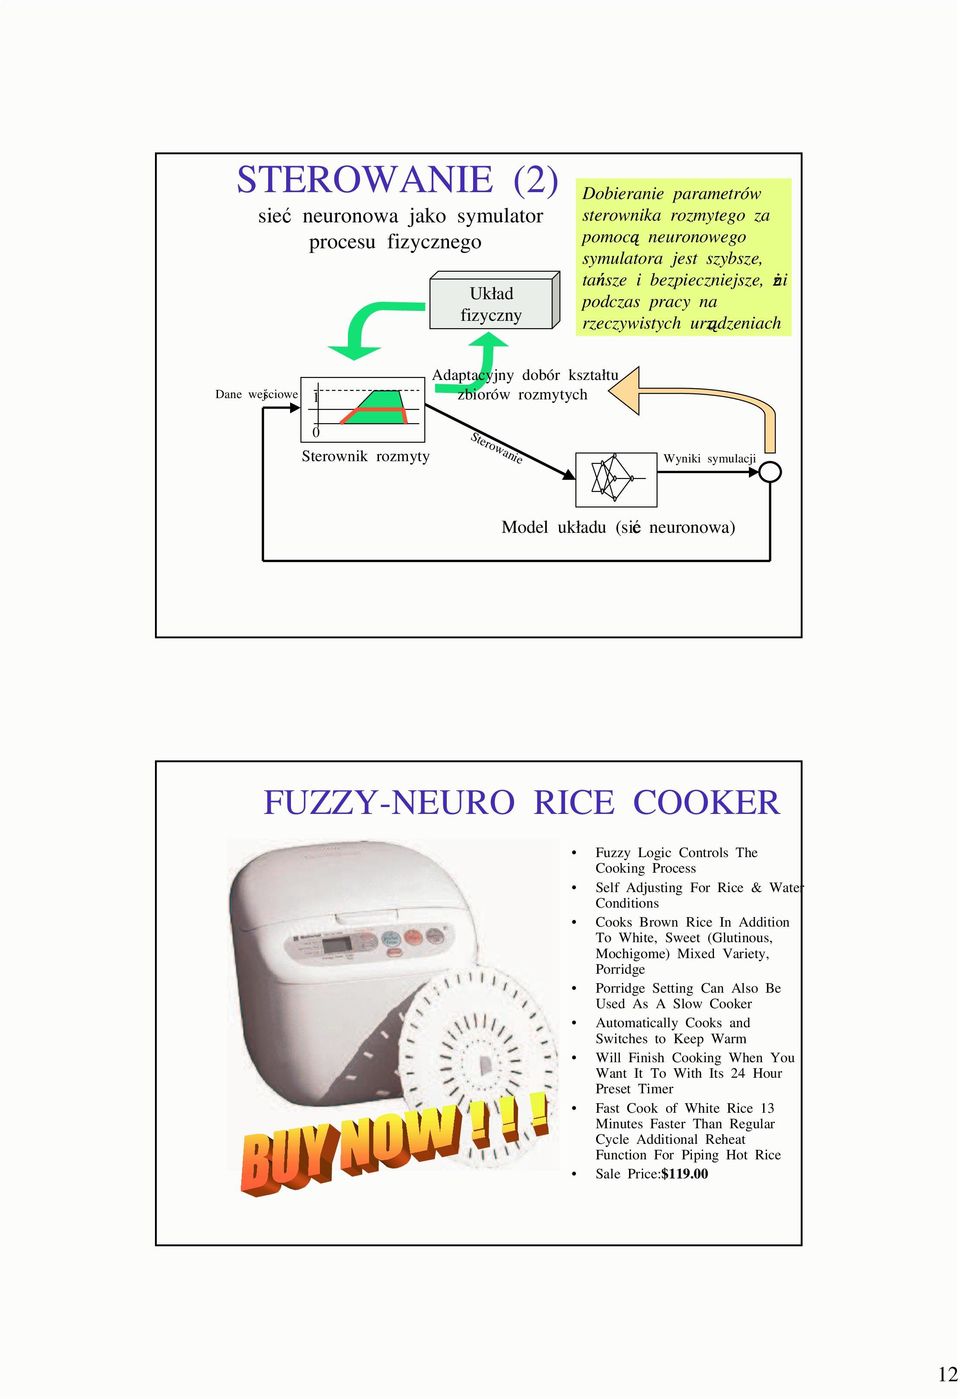 COOKER Fuzzy Logic Controls The Cooking Process Self Adjusting For Rice & Water Conditions Cooks Brown Rice In Addition To White, Sweet (Glutinous, Mochigome) Mixed Variety, Porridge Porridge Setting